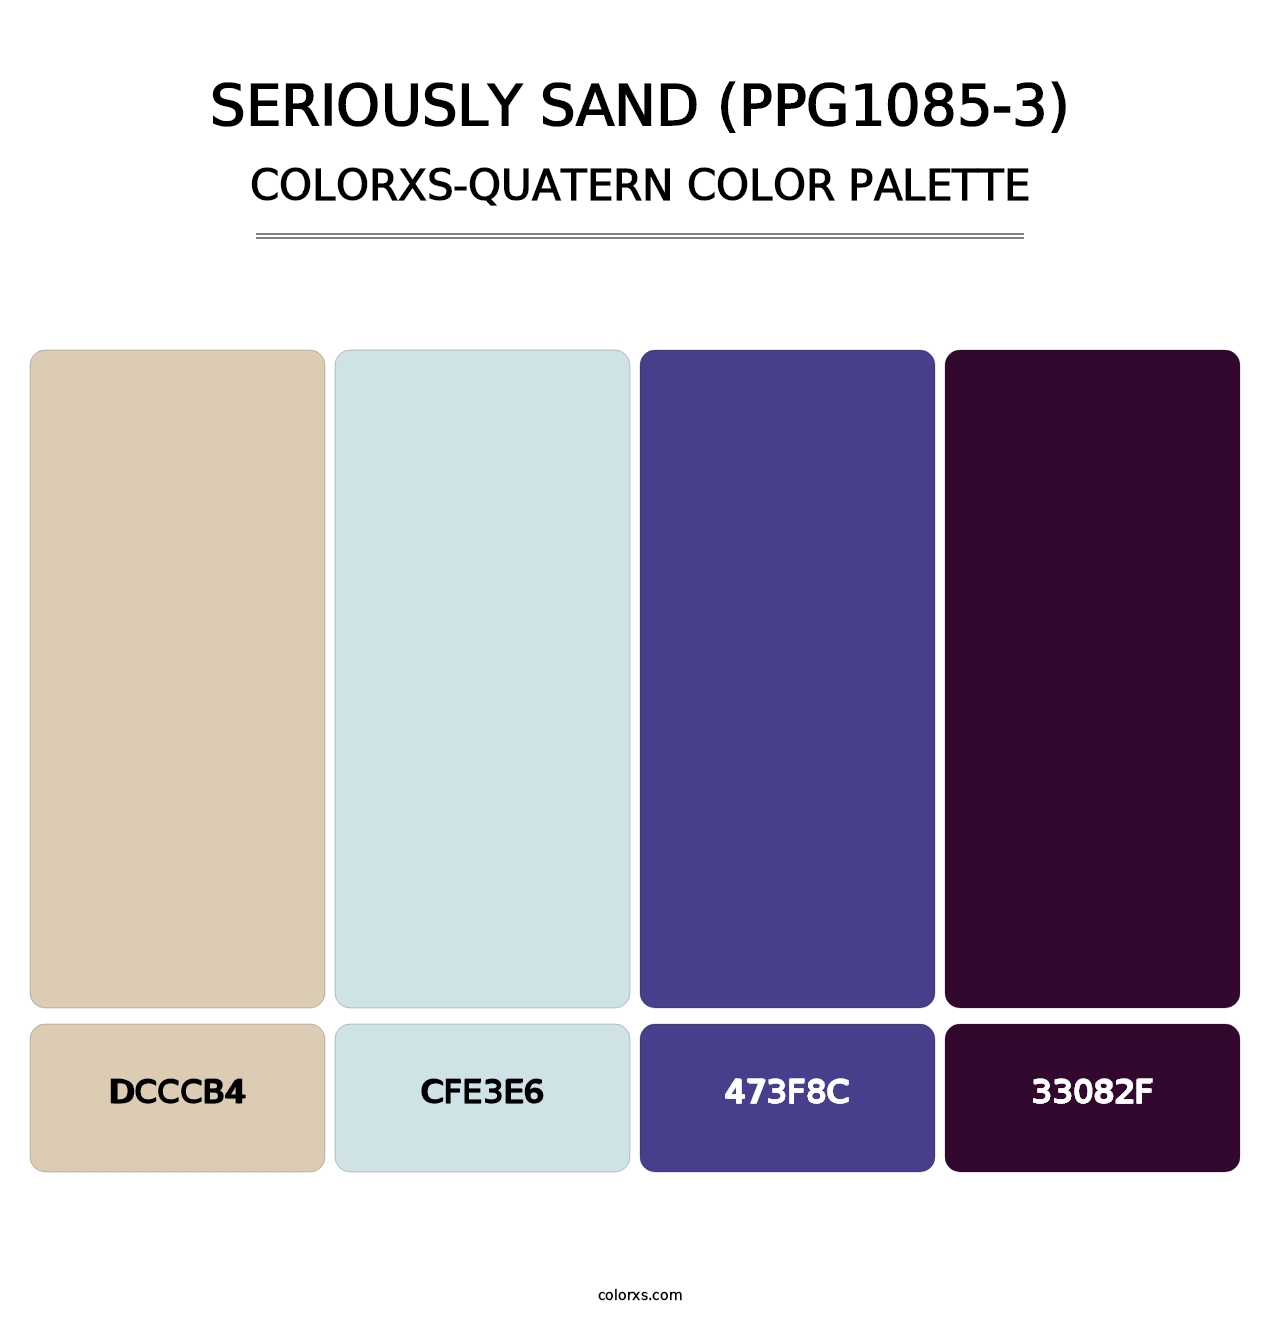 Seriously Sand (PPG1085-3) - Colorxs Quatern Palette